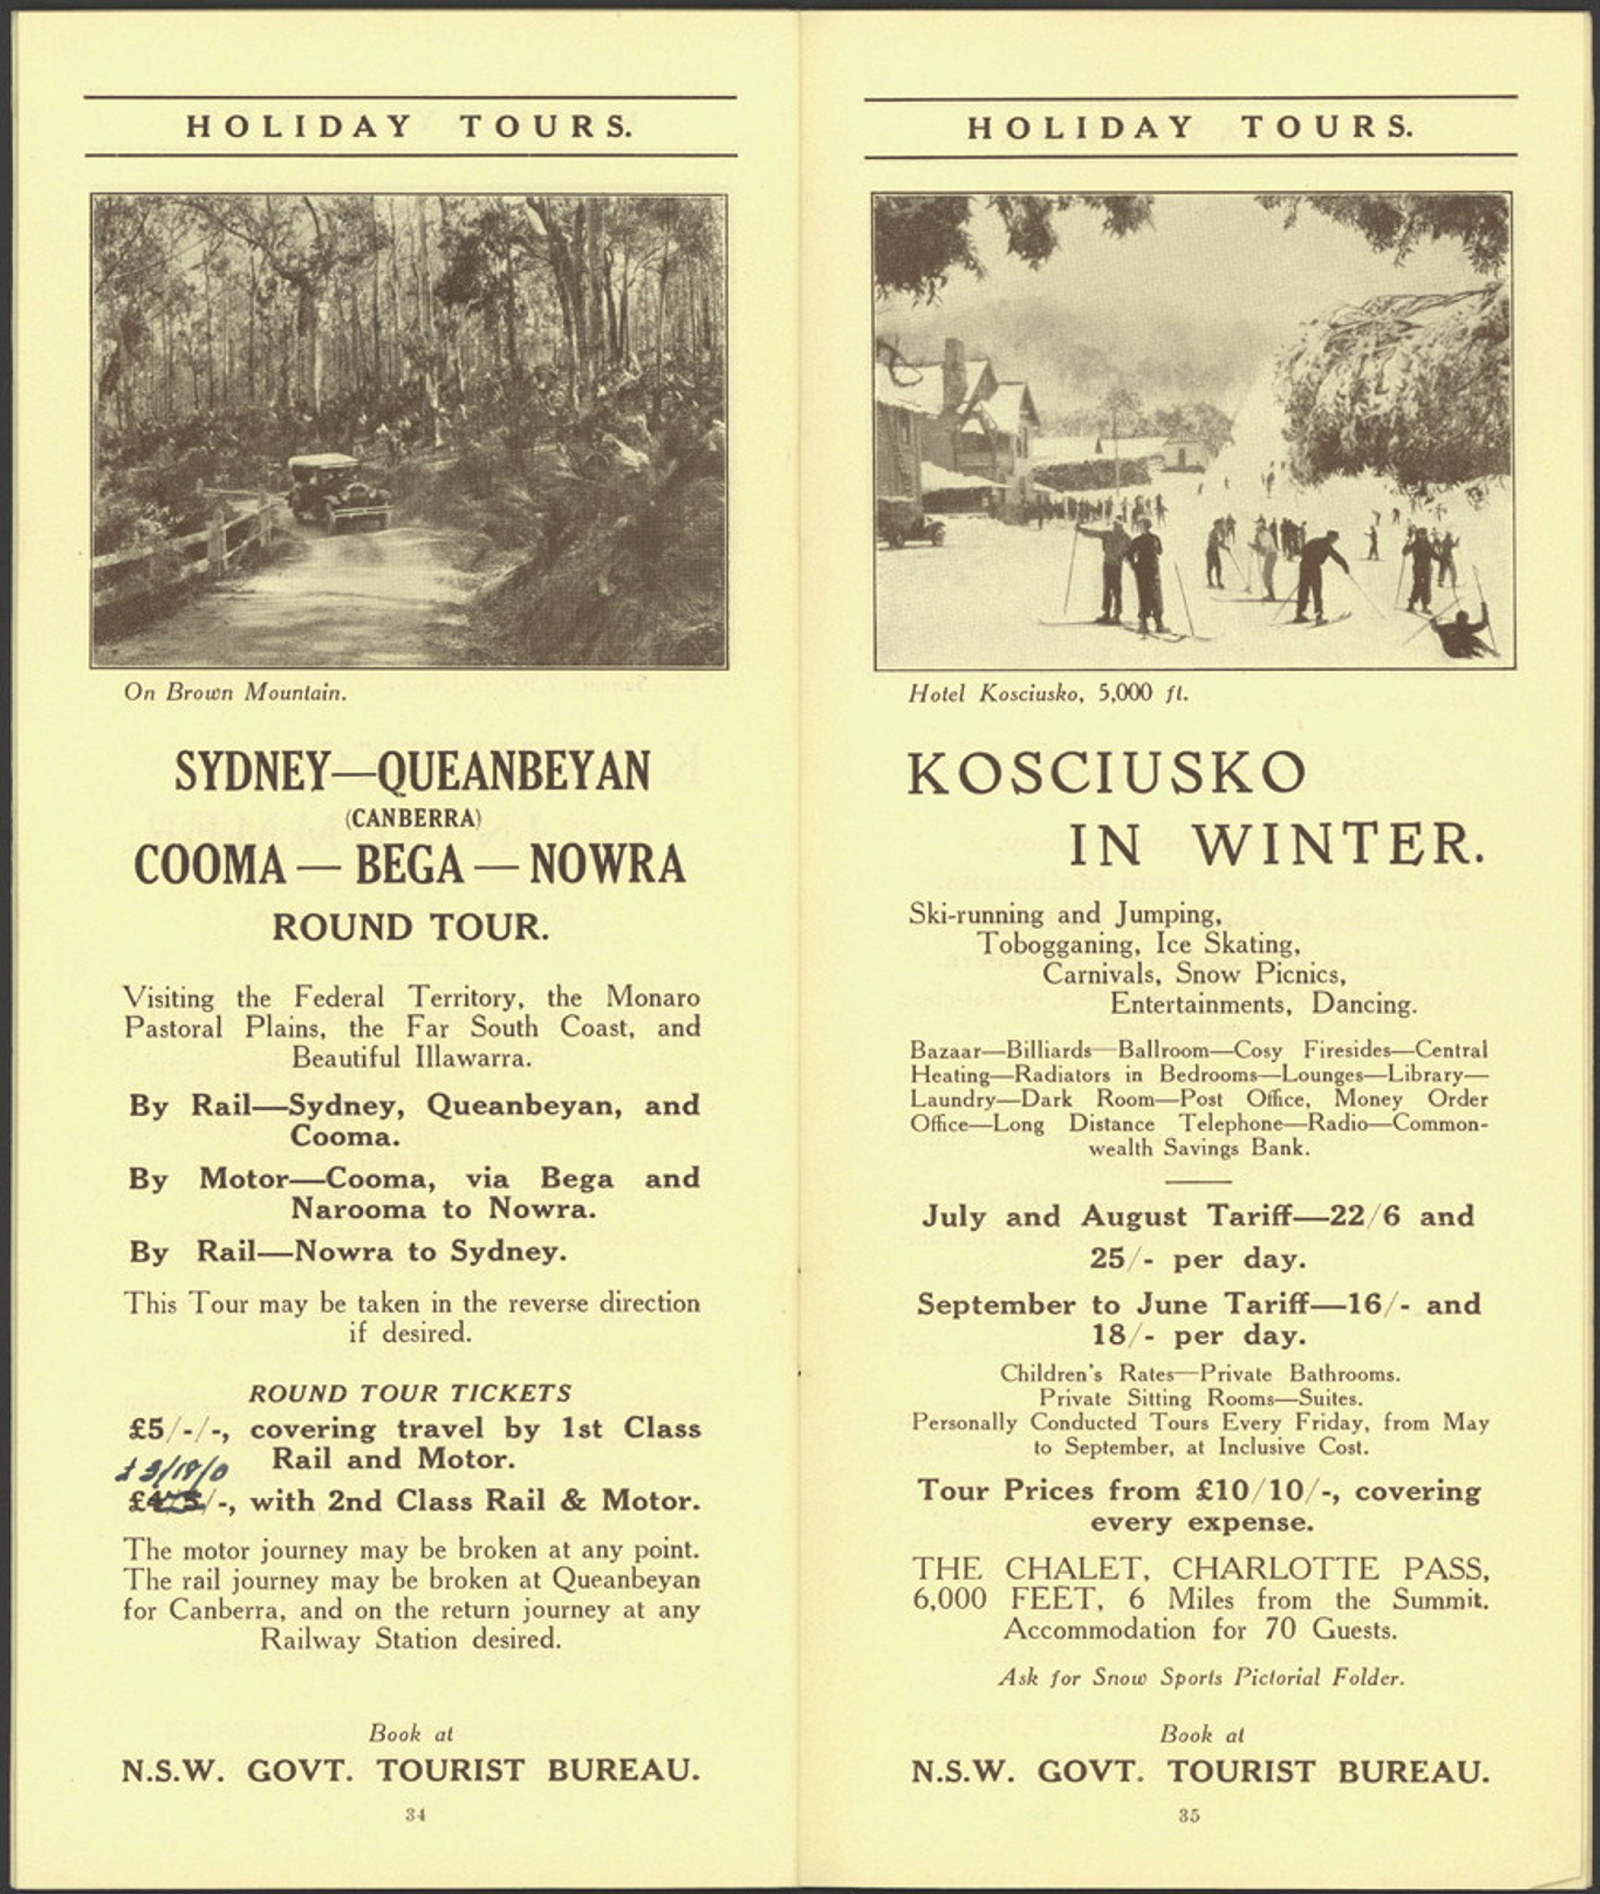 Page 34 - Sydney to Queanbeyan & Cooma to Bega & Nowra round tour. Photo on Brown Mountain. Page 35 - Kosciusko in winter. Ski-running and jumping, tobogganing, ice skating, carnivals, snow picnics, entertainments, dancing. ID 16410_a111_11a_000022_p34-35